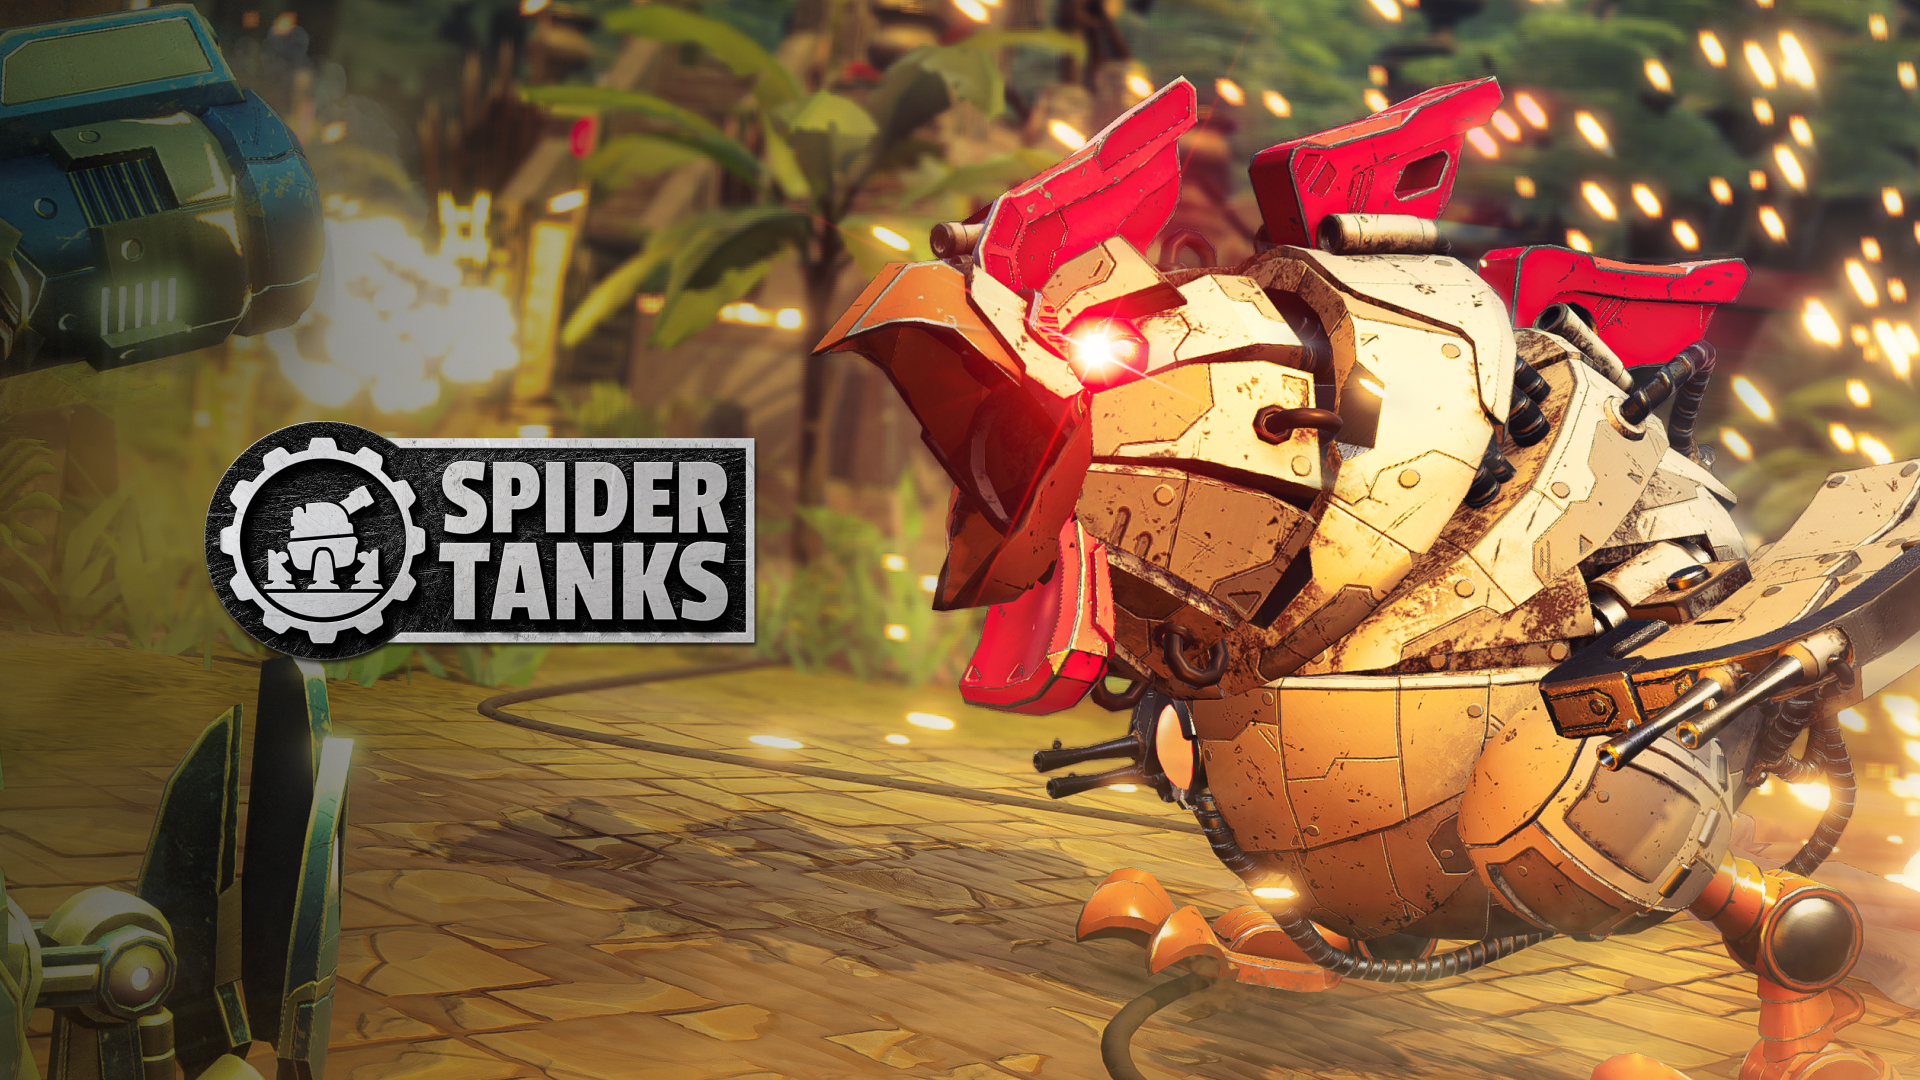 All Spider Tanks store items are now available for SILK, the reward currency of the web3 brawler.